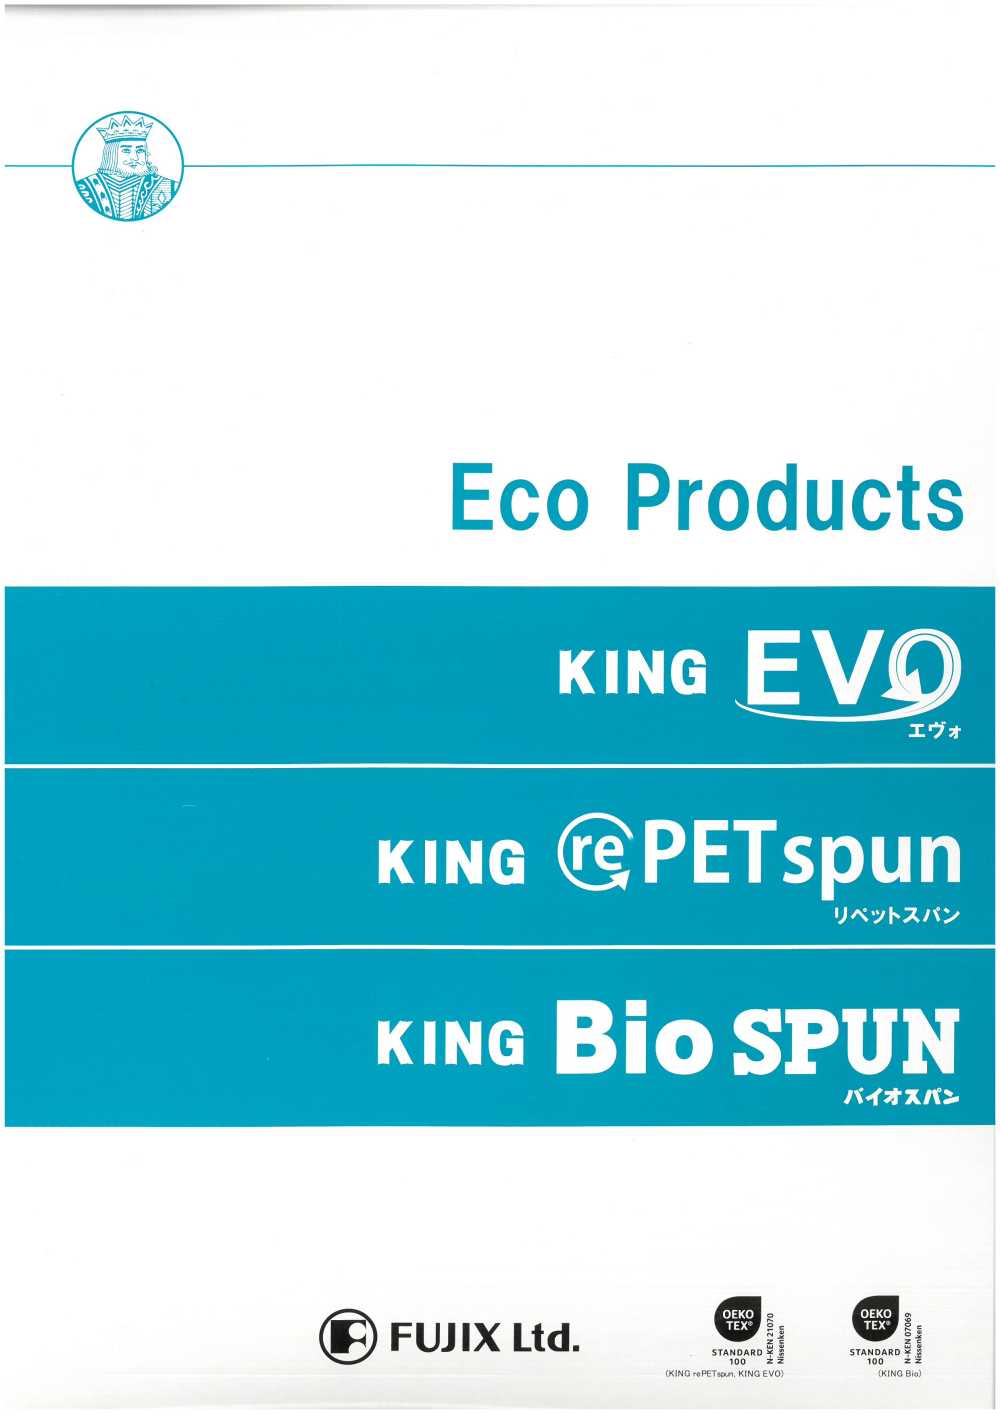 KING-EVO King Evo Sewing Thread (Made With Recycled Polyester) FUJIX